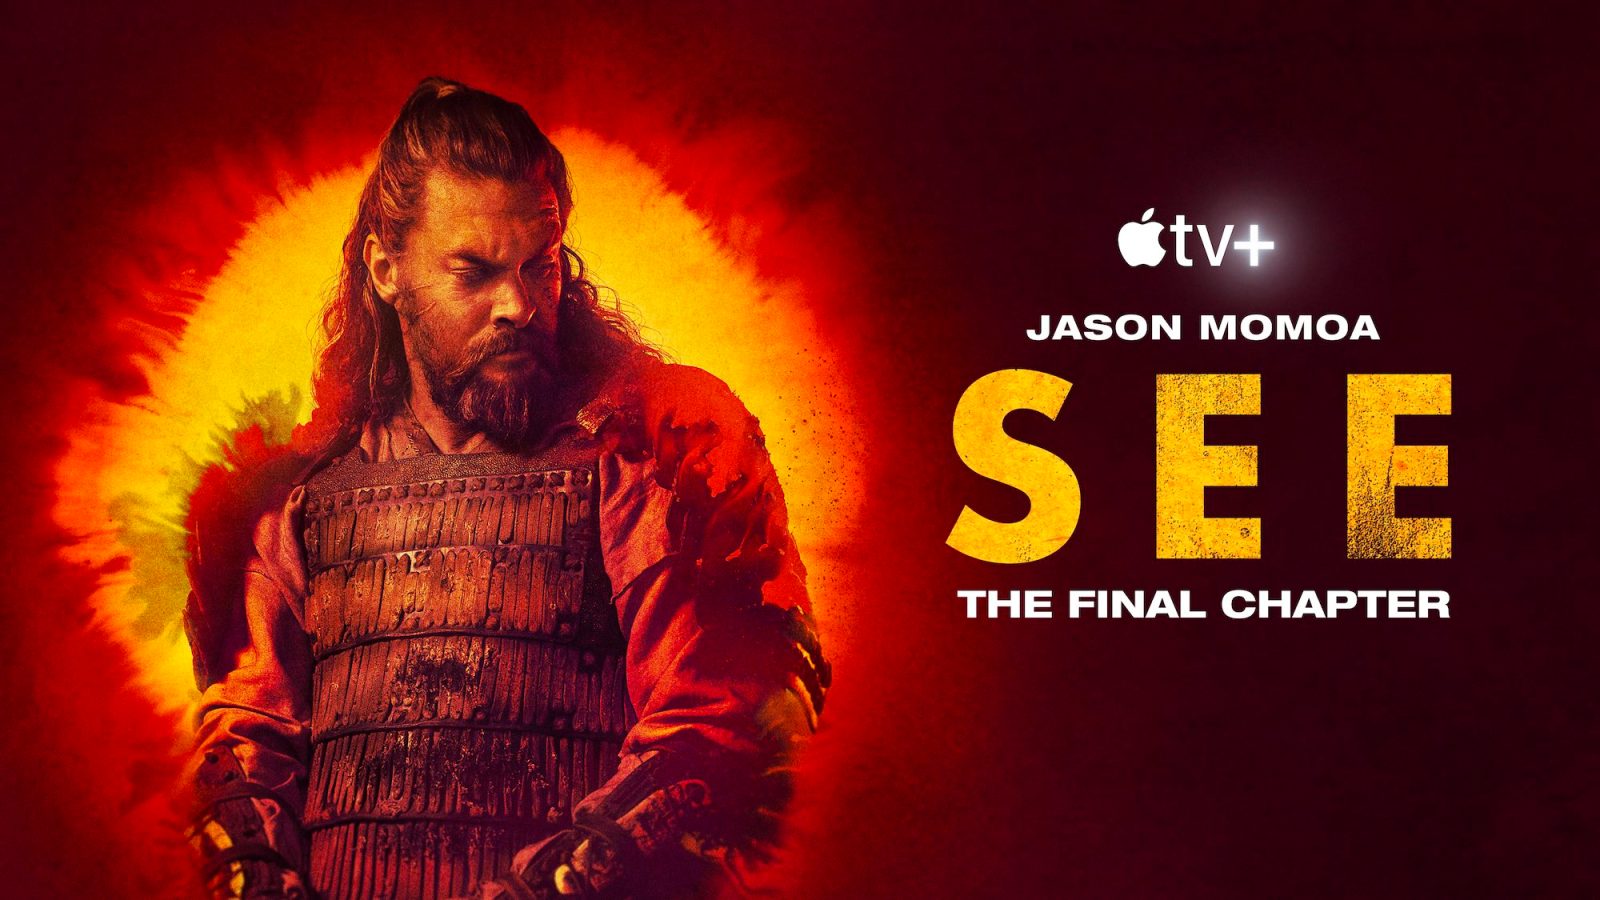 Season 1 of 'SEE' available to watch for free on Apple TV+ ahead of Season 3 premiere